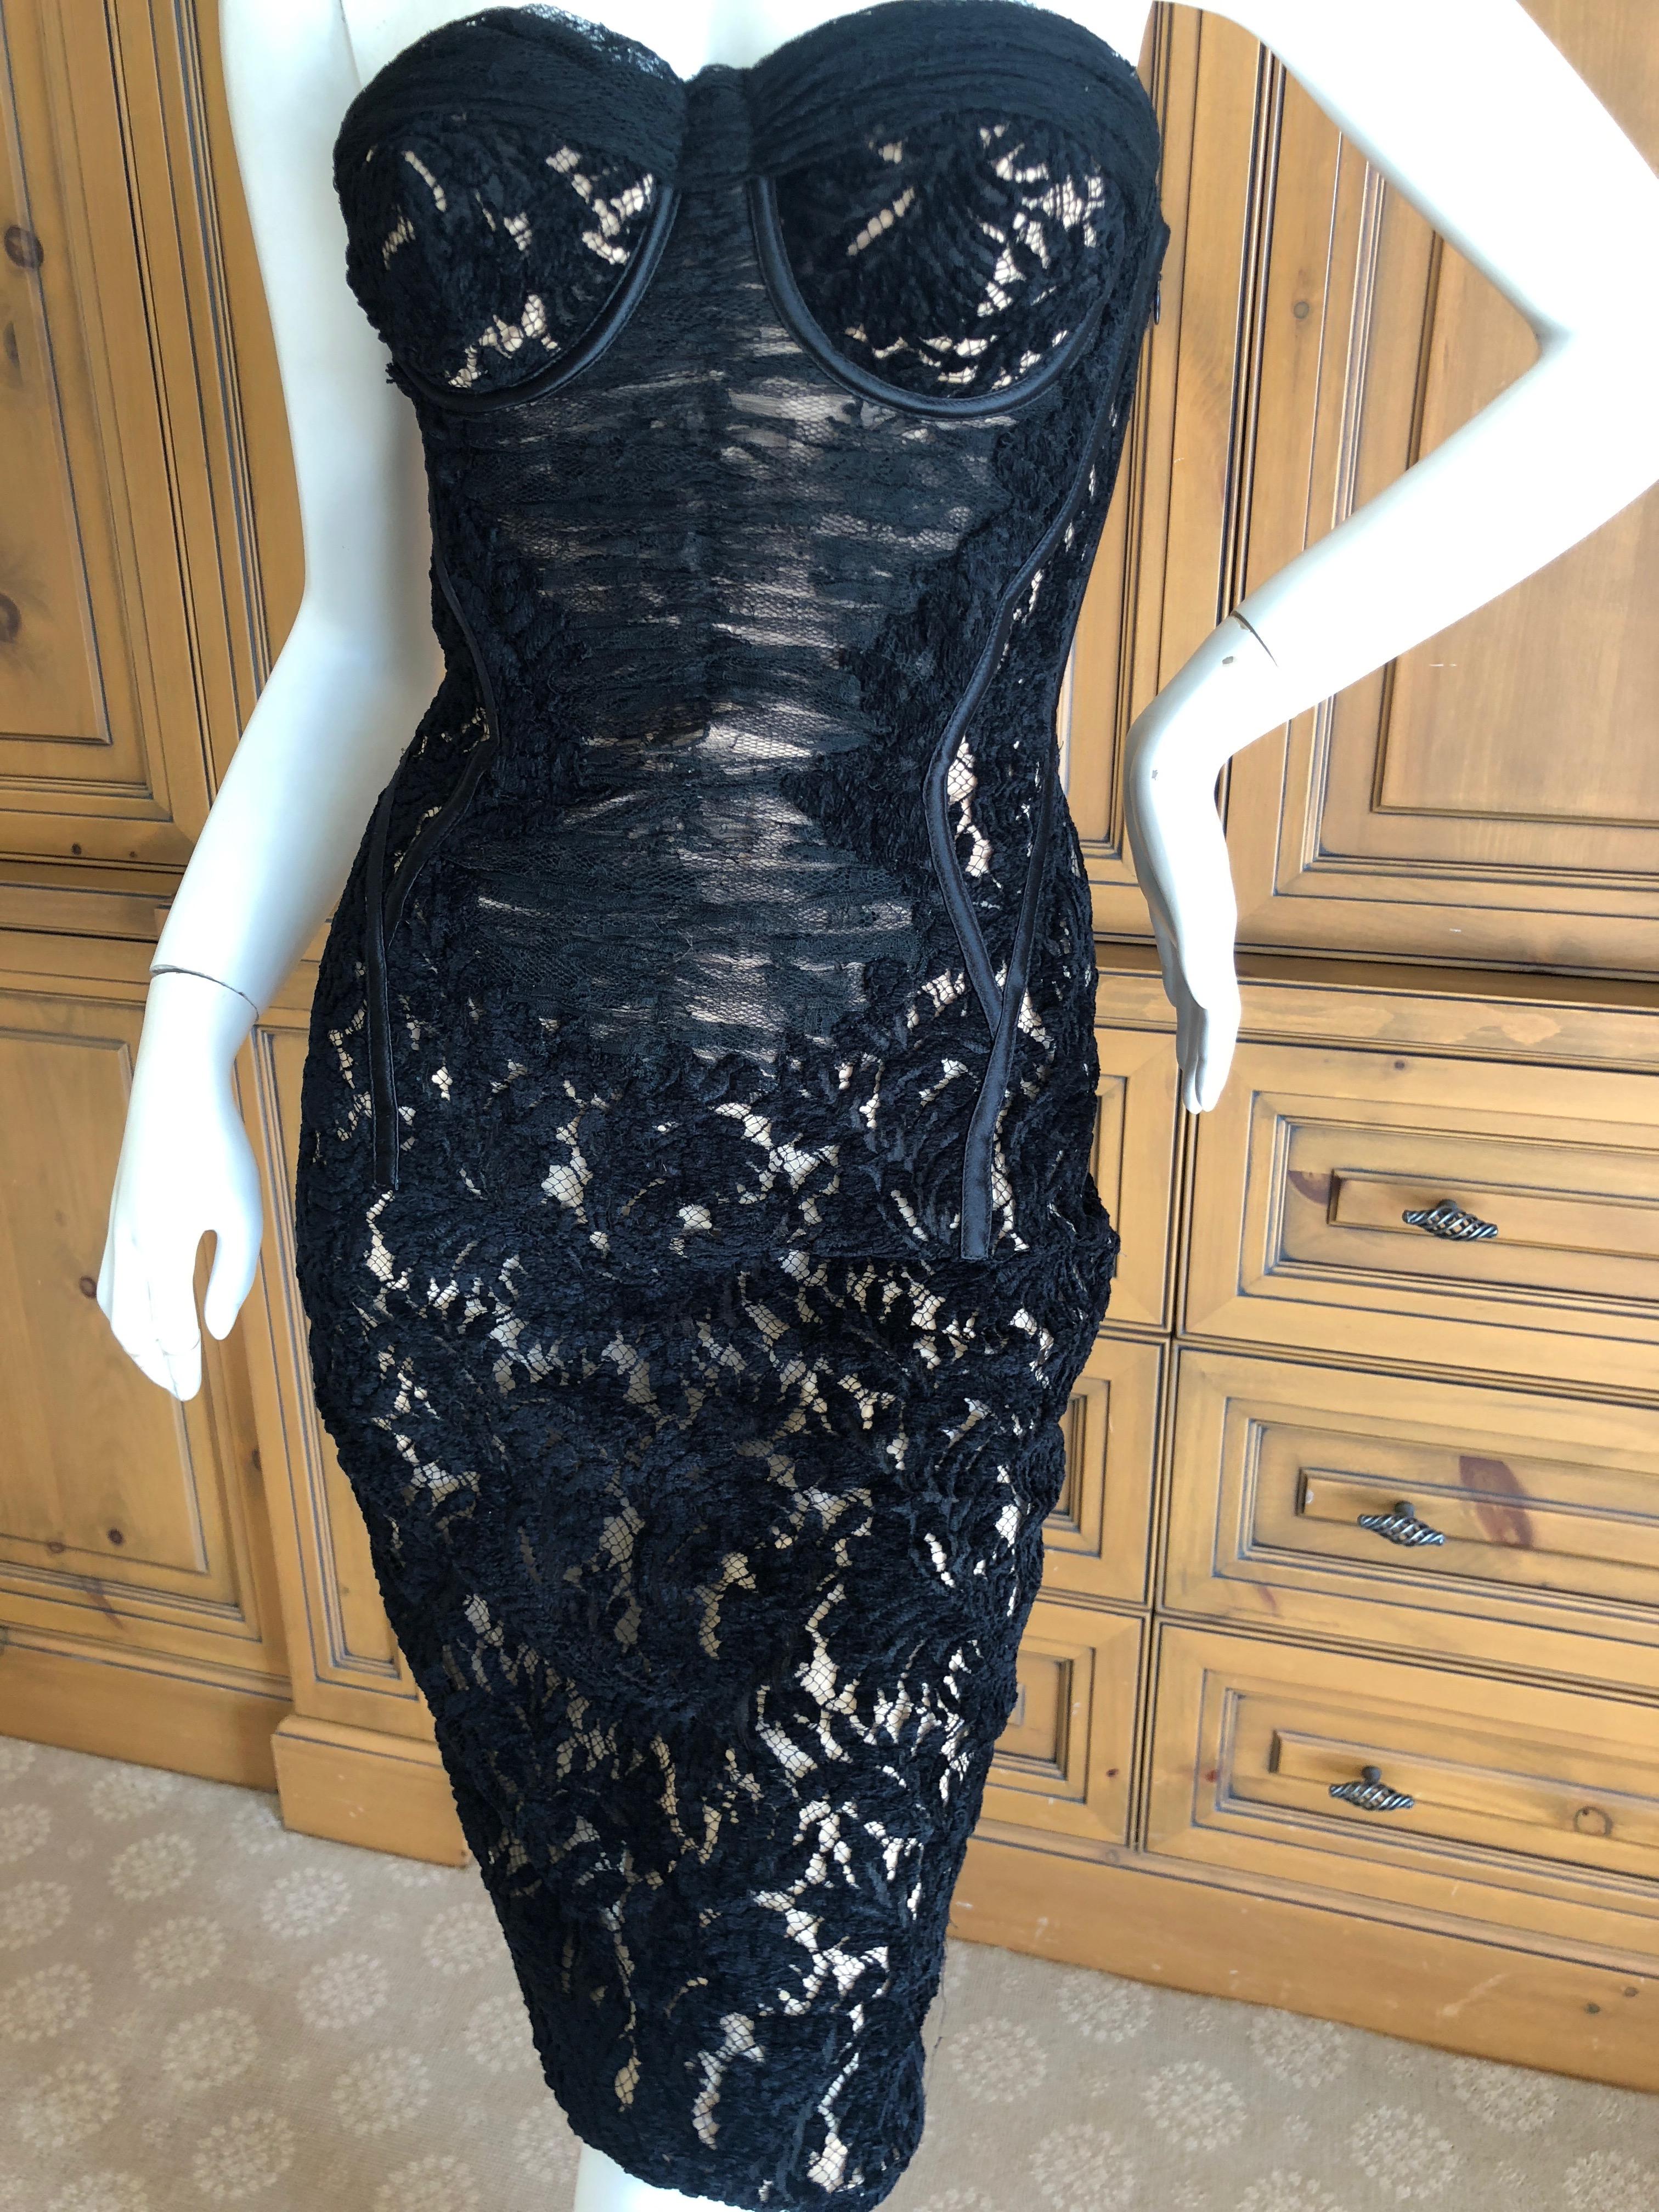 Gianni Versace Couture Vintage Black Devore Velvet Sheer Corseted Cocktail Dress In Excellent Condition For Sale In Cloverdale, CA